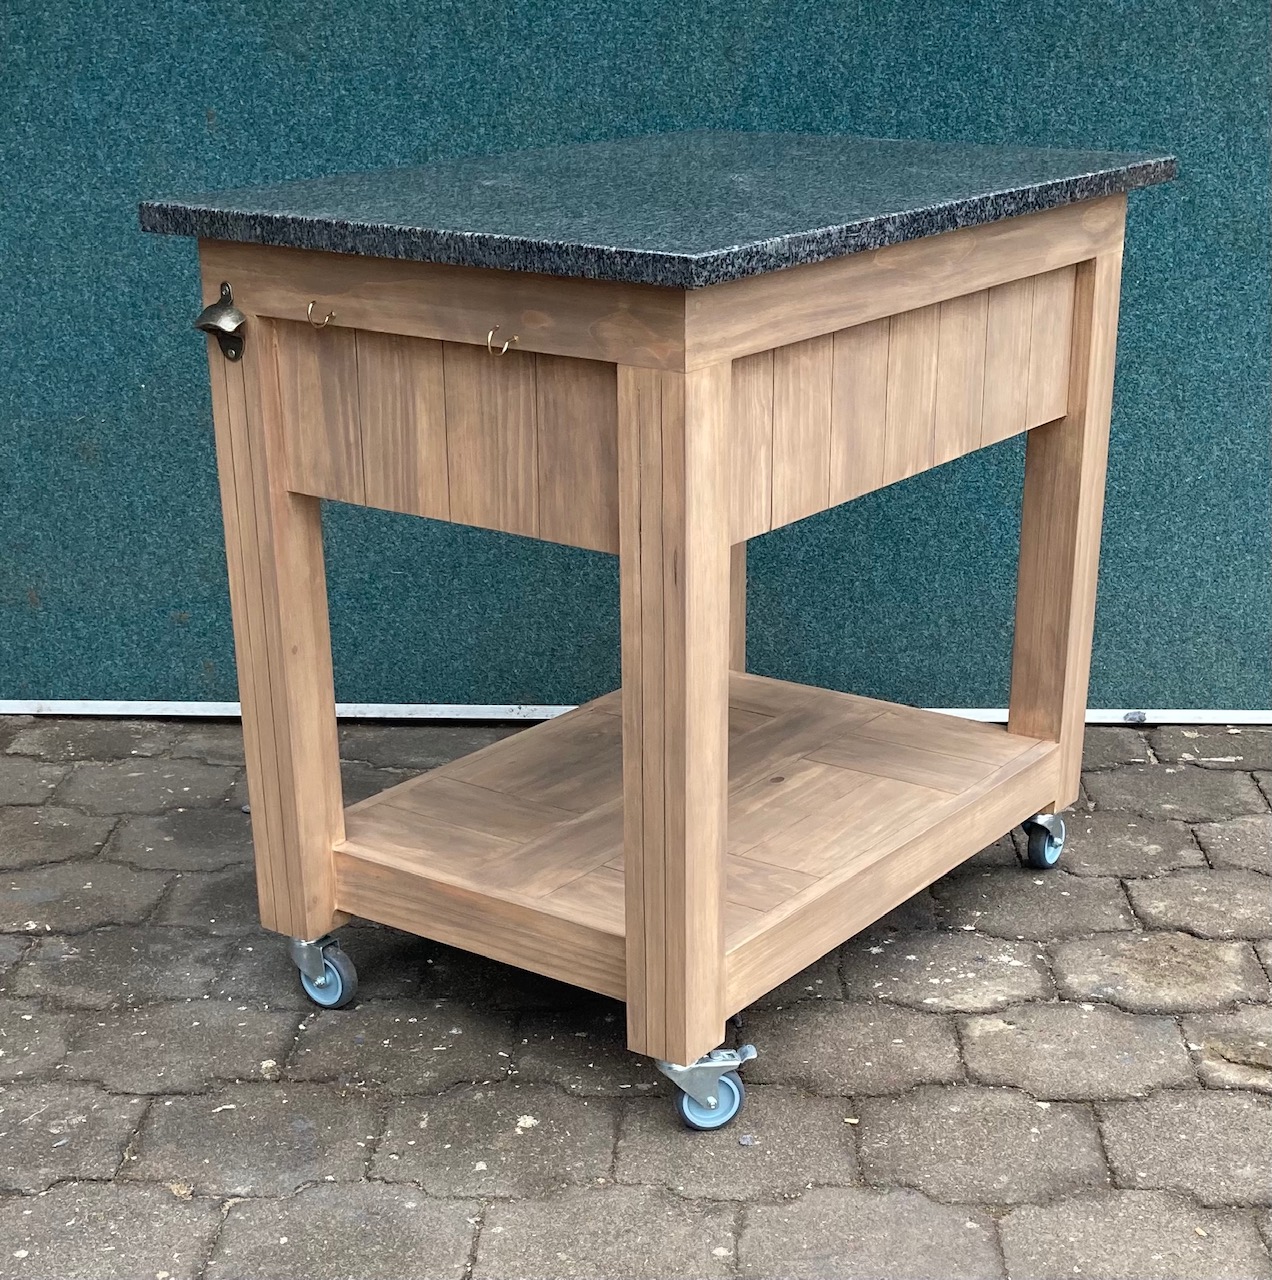 Butchers Block Cottage Executive series 0980 - Stained